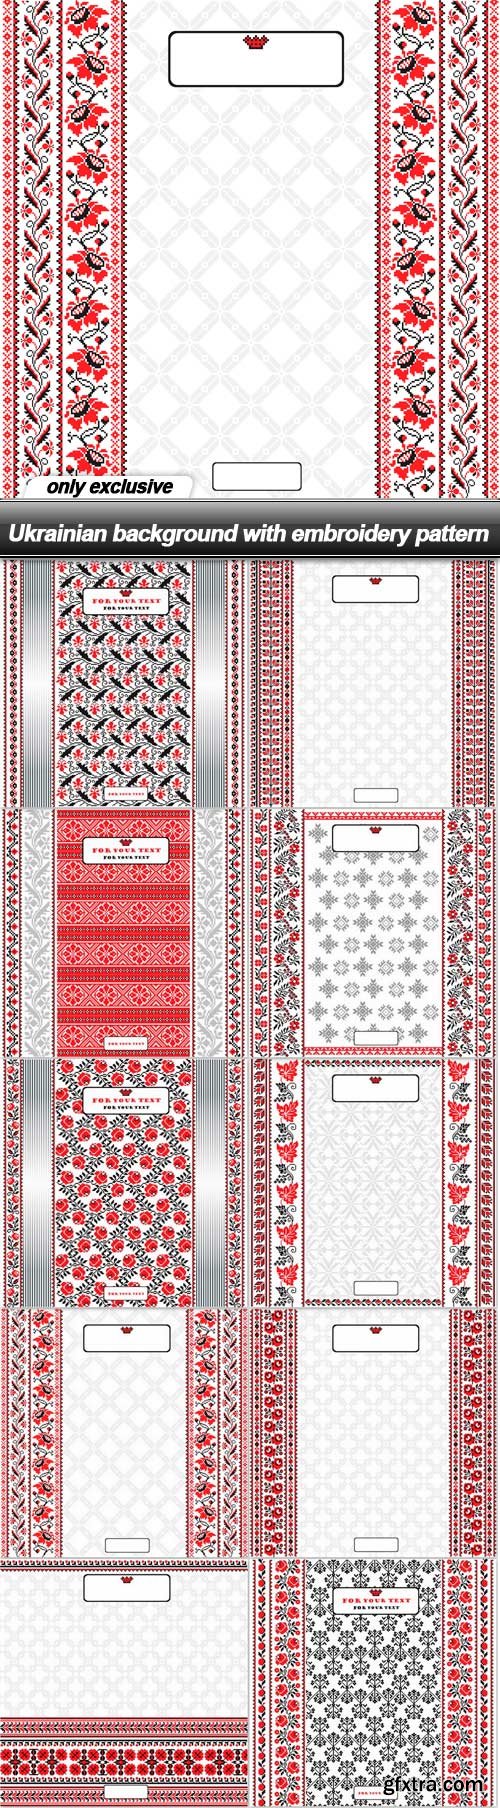 Ukrainian background with embroidery pattern - 10 EPS